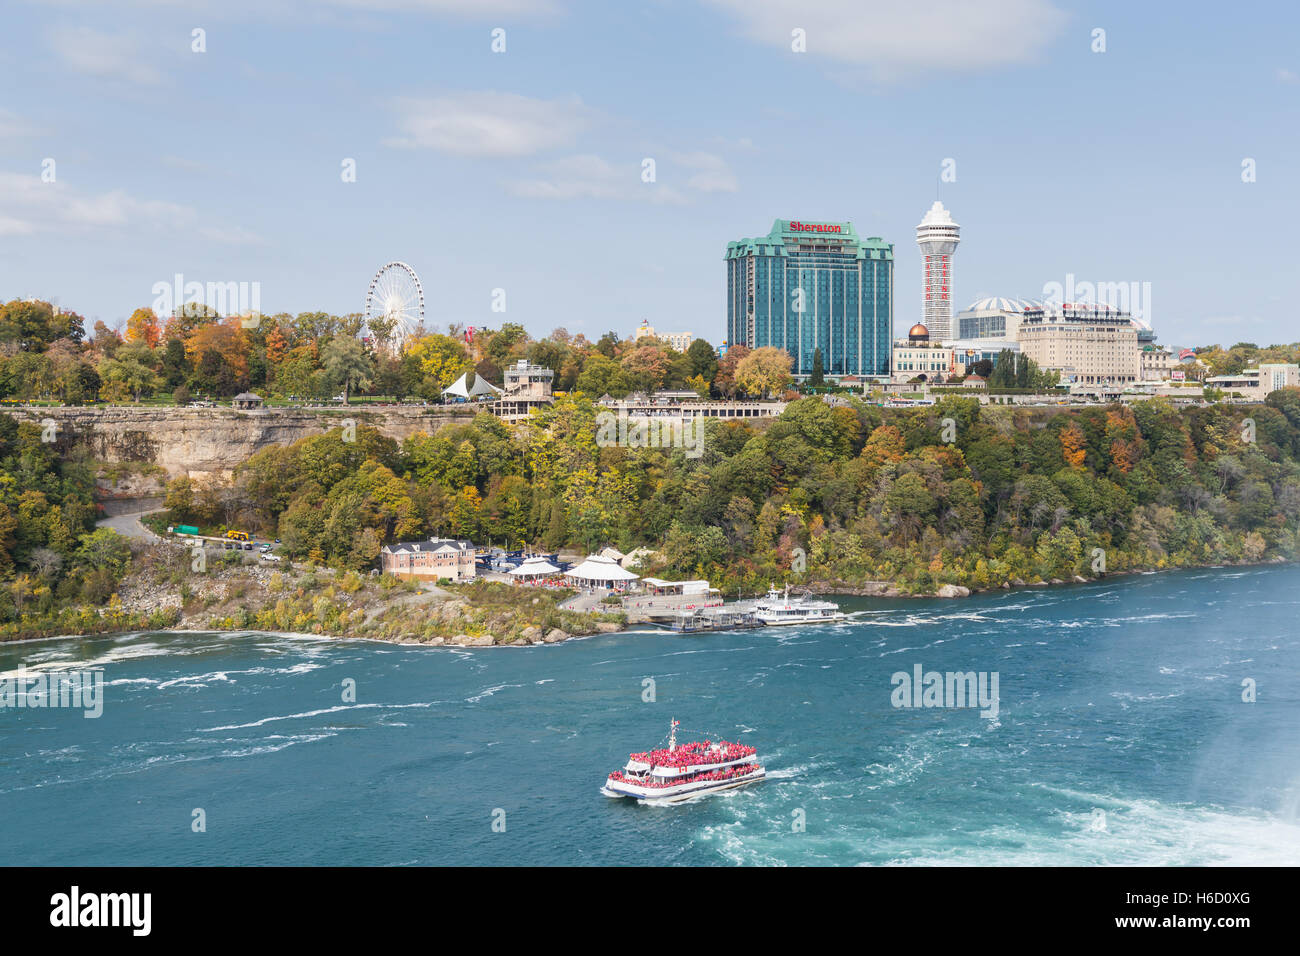 The Clifton Hill district in Niagara Falls, Ontario as viewed from Goat Island in Niagara Falls, New York during autumn. Stock Photo